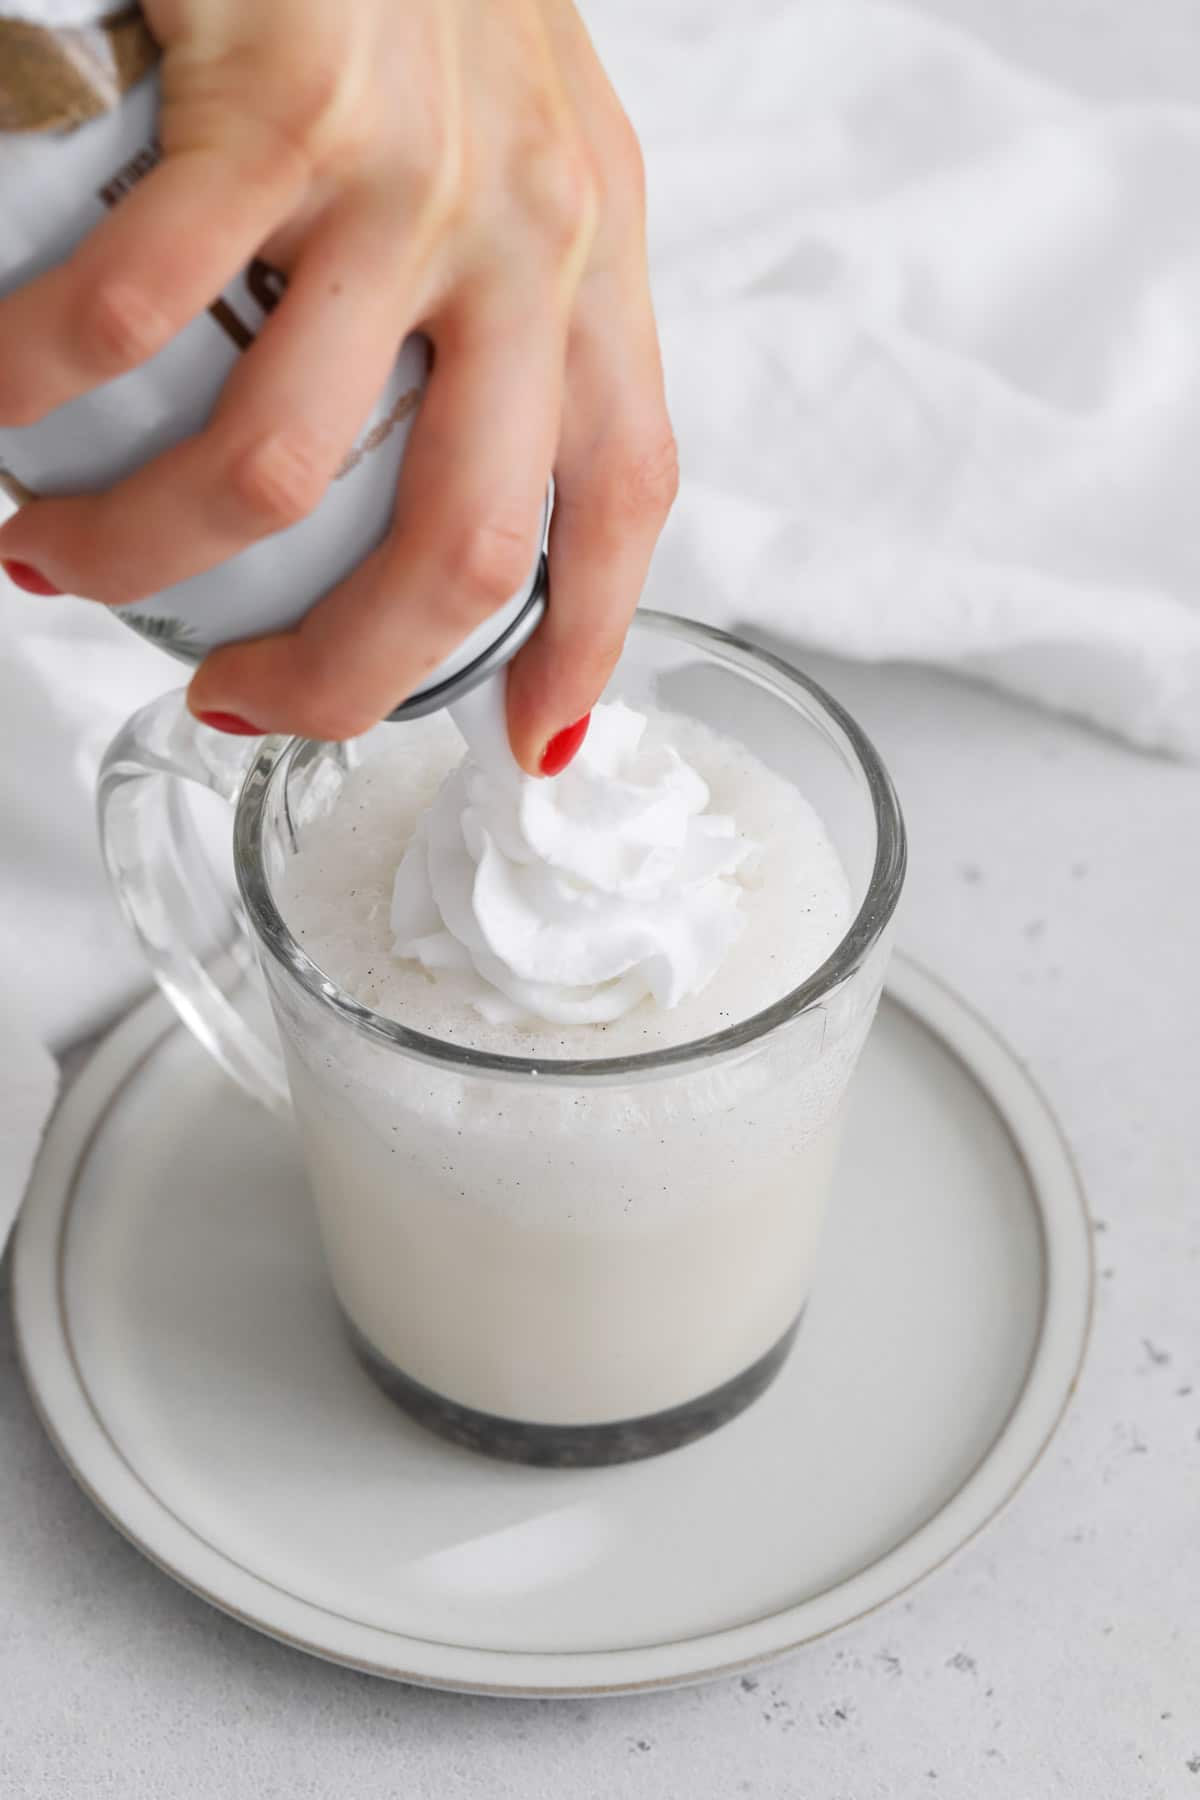 Putting whipped cream on a vanilla steamer